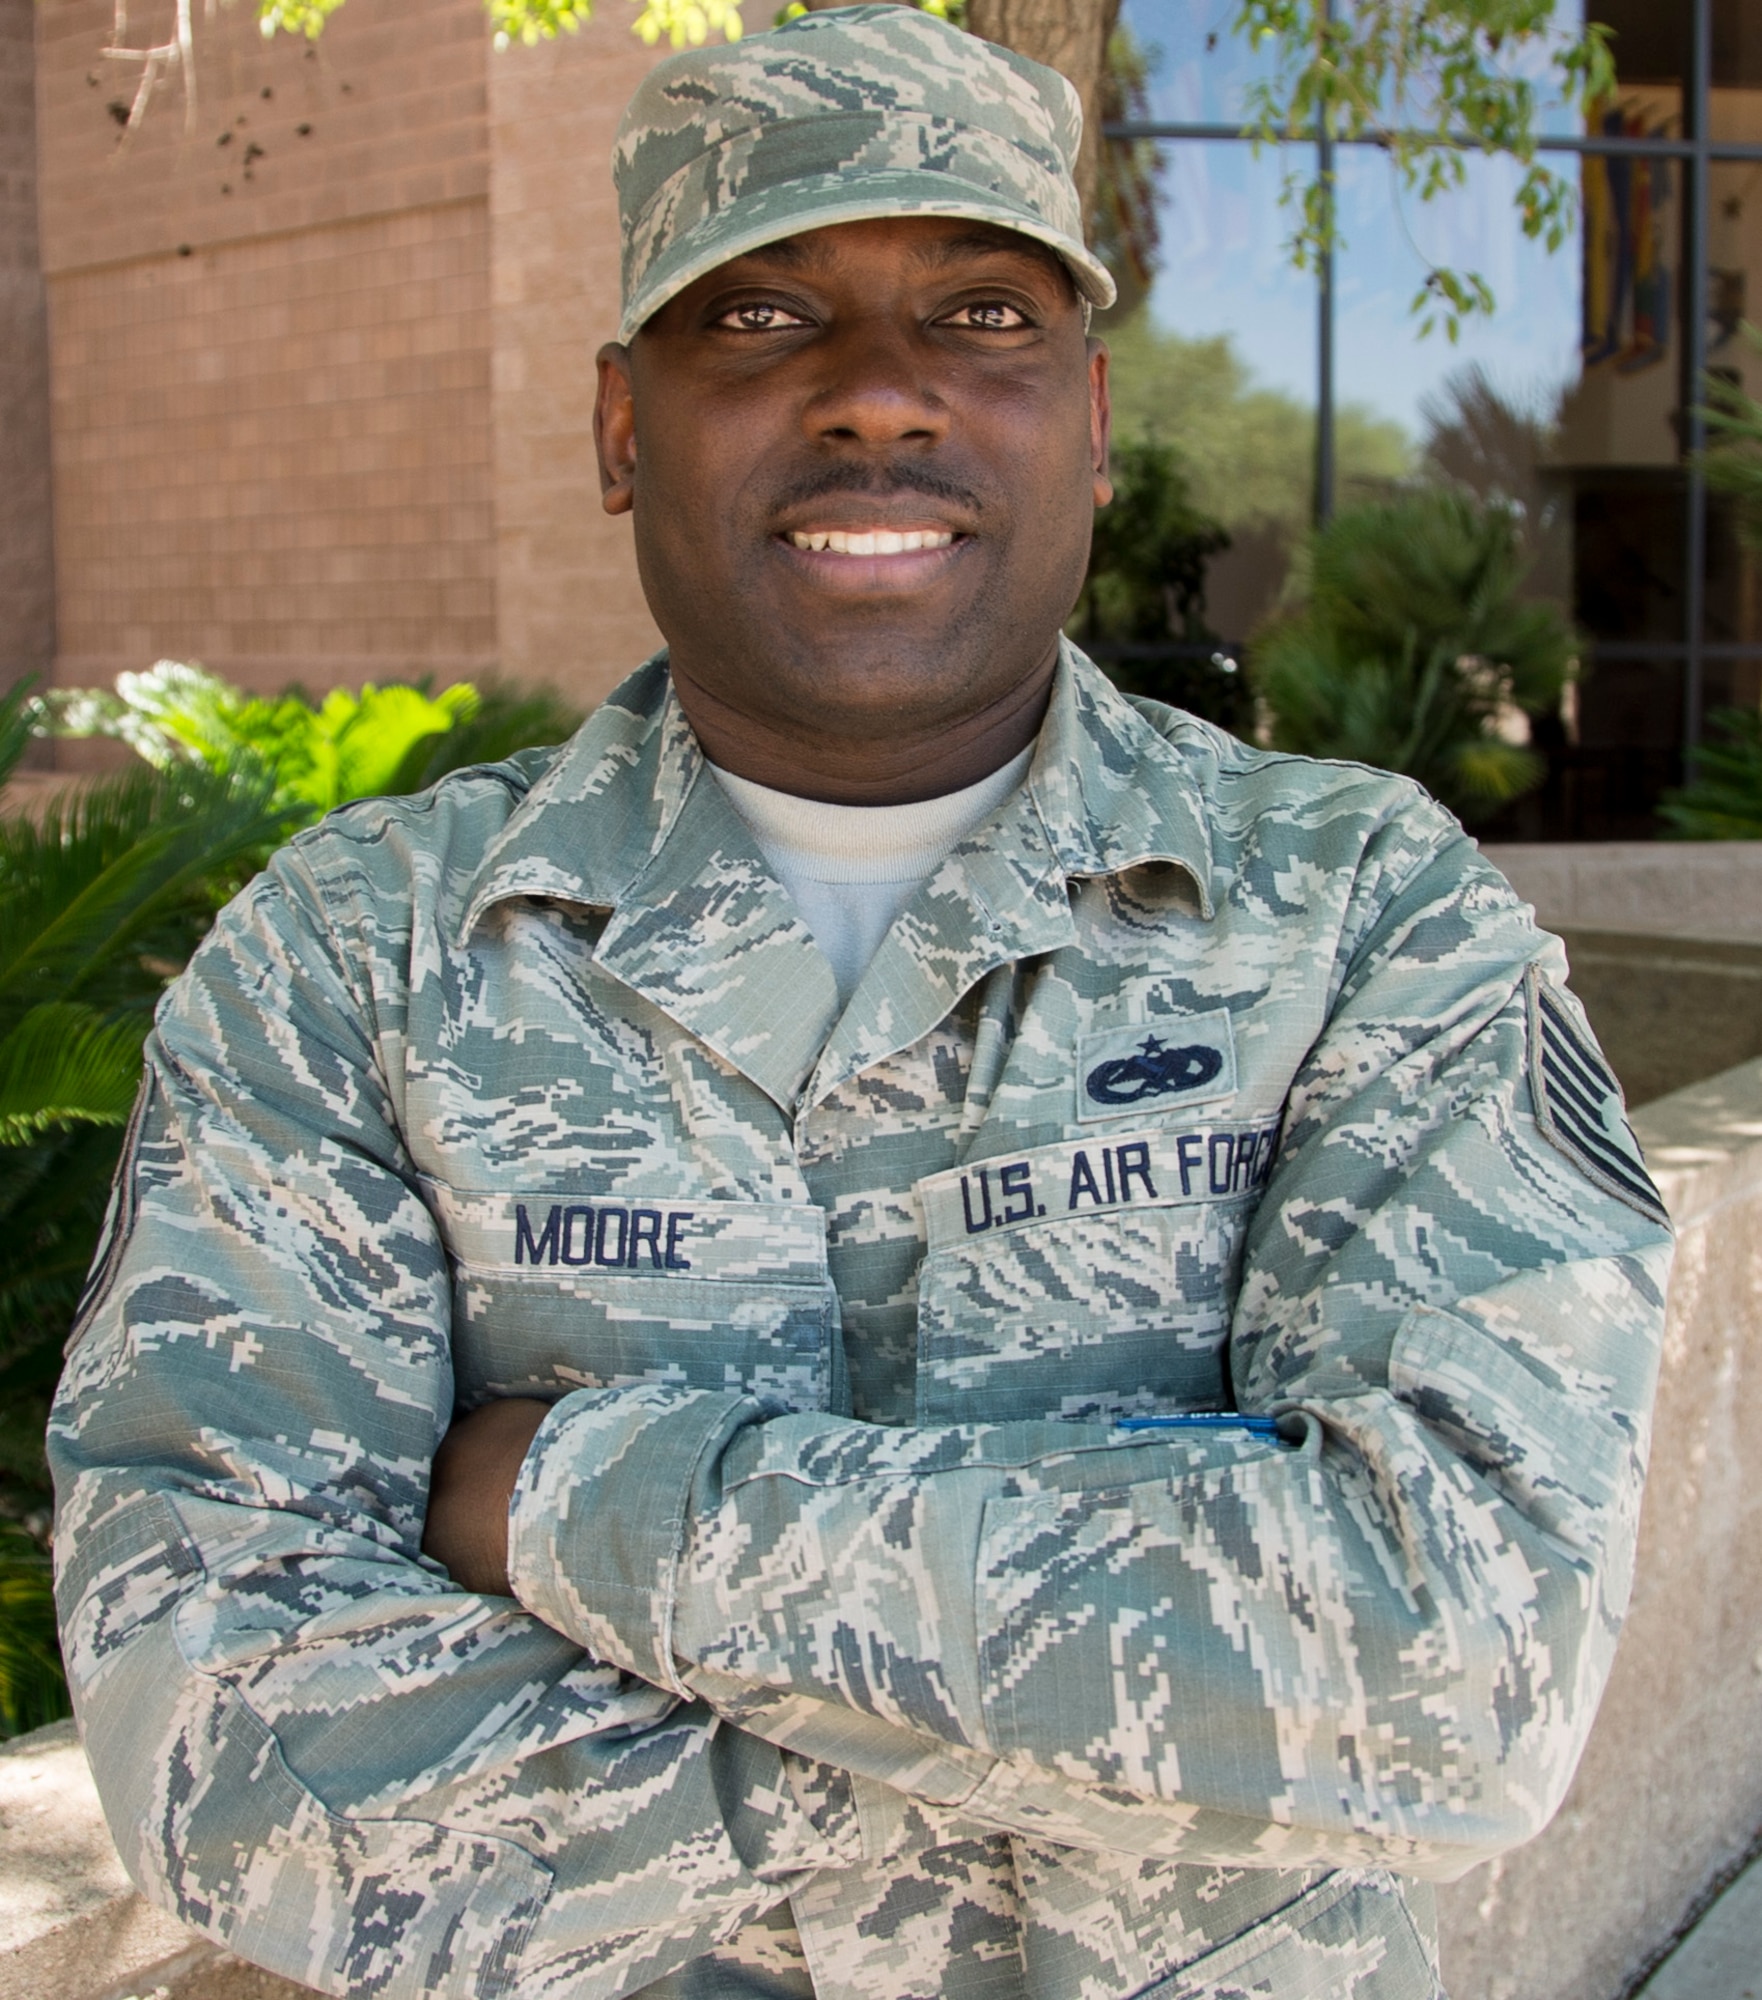 Tech Sgt. Anthony Moore, 12th Air Force (Air Forces Southern) weapons safety manager, has been selected as Warfighter of the Week, at Davis-Monthan AFB, Ariz., July  30, 2015. War Fighter of the Week is an opportunity for the Airmen who represent 12th Air Force (Air Forces Southern) to share their own story. The Warfighter of the Week intuitive also aligns with the 12th Air Force (Air Forces Southern) commander’s priority of creating a work environment where someone knows you both professionally and personally.  (U.S. Air Force photo by Staff Sgt. Adam Grant/Released)